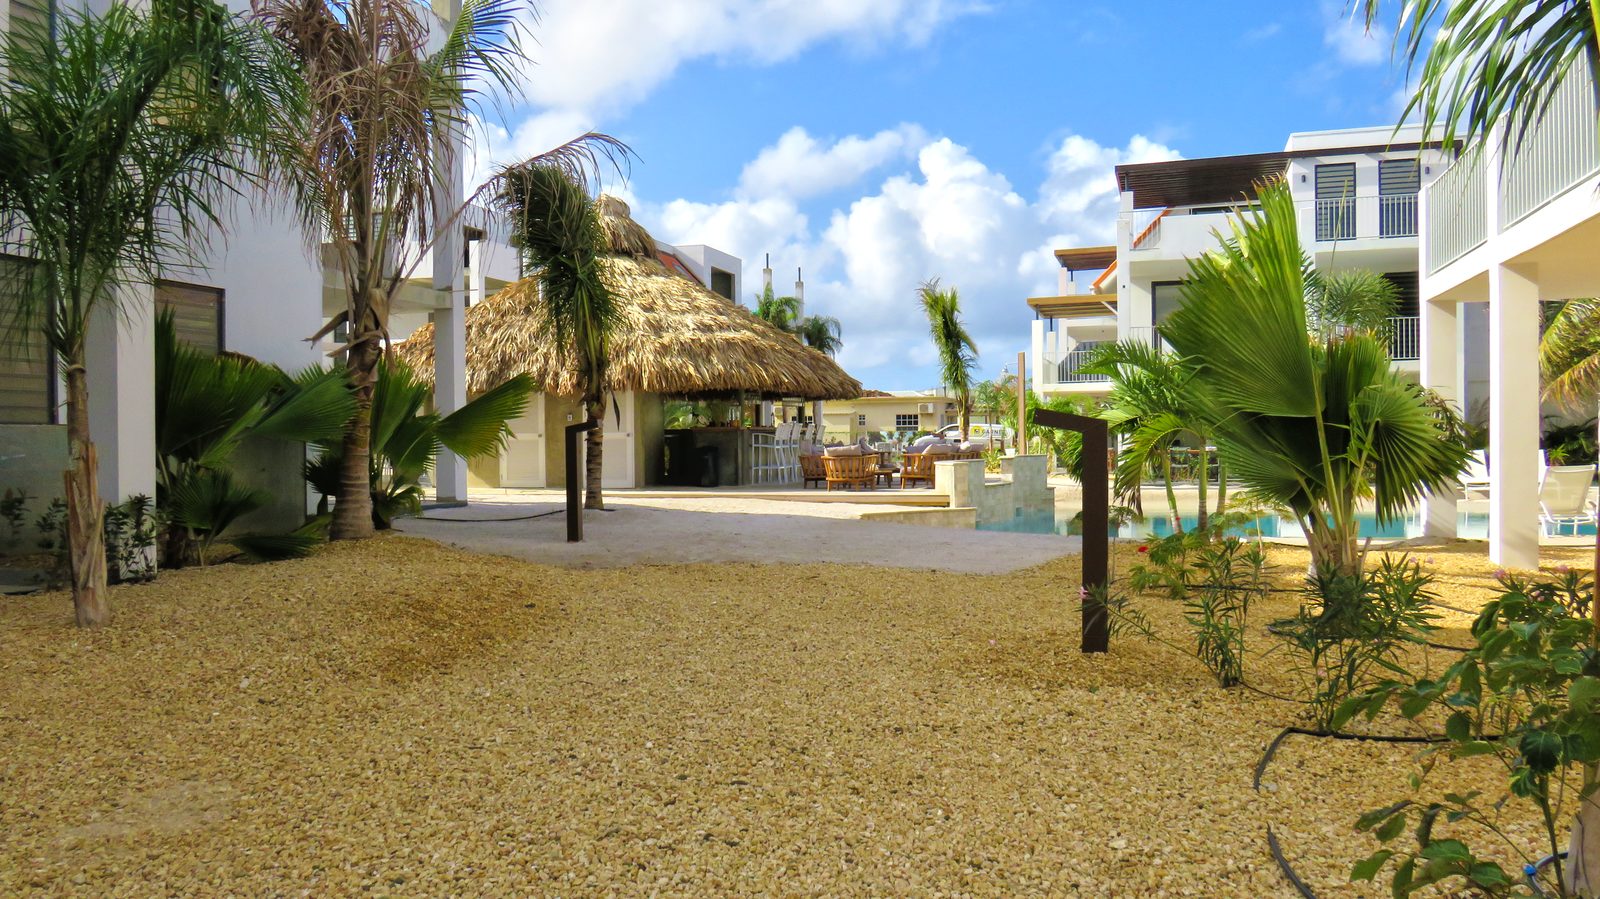 One of the best places to stay on Bonaire, is Resort Bonaire. A good place for couples and families to relax and enjoy. 